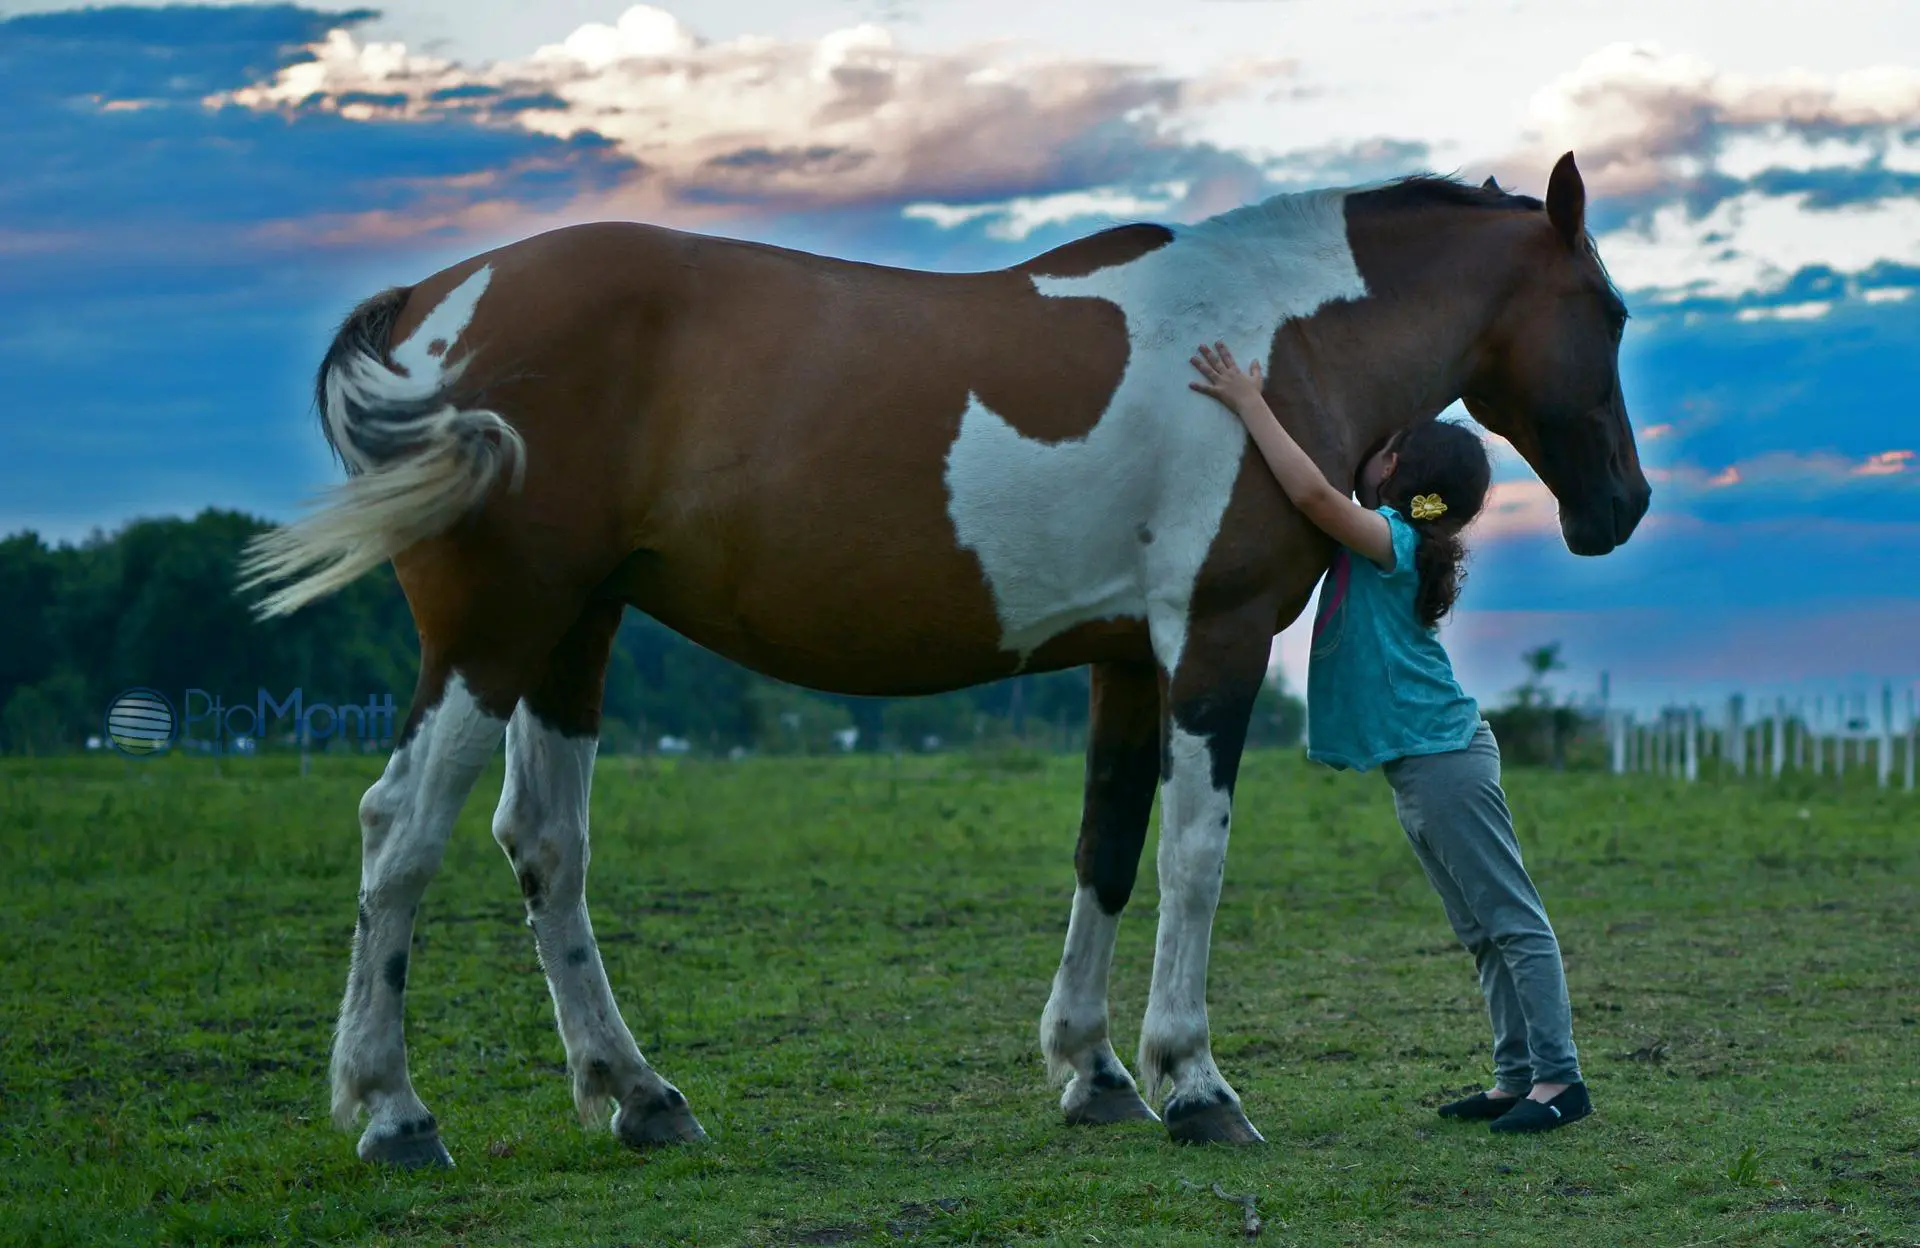 Adopt the Horse of Your Dreams: A Step-by-Step Guide